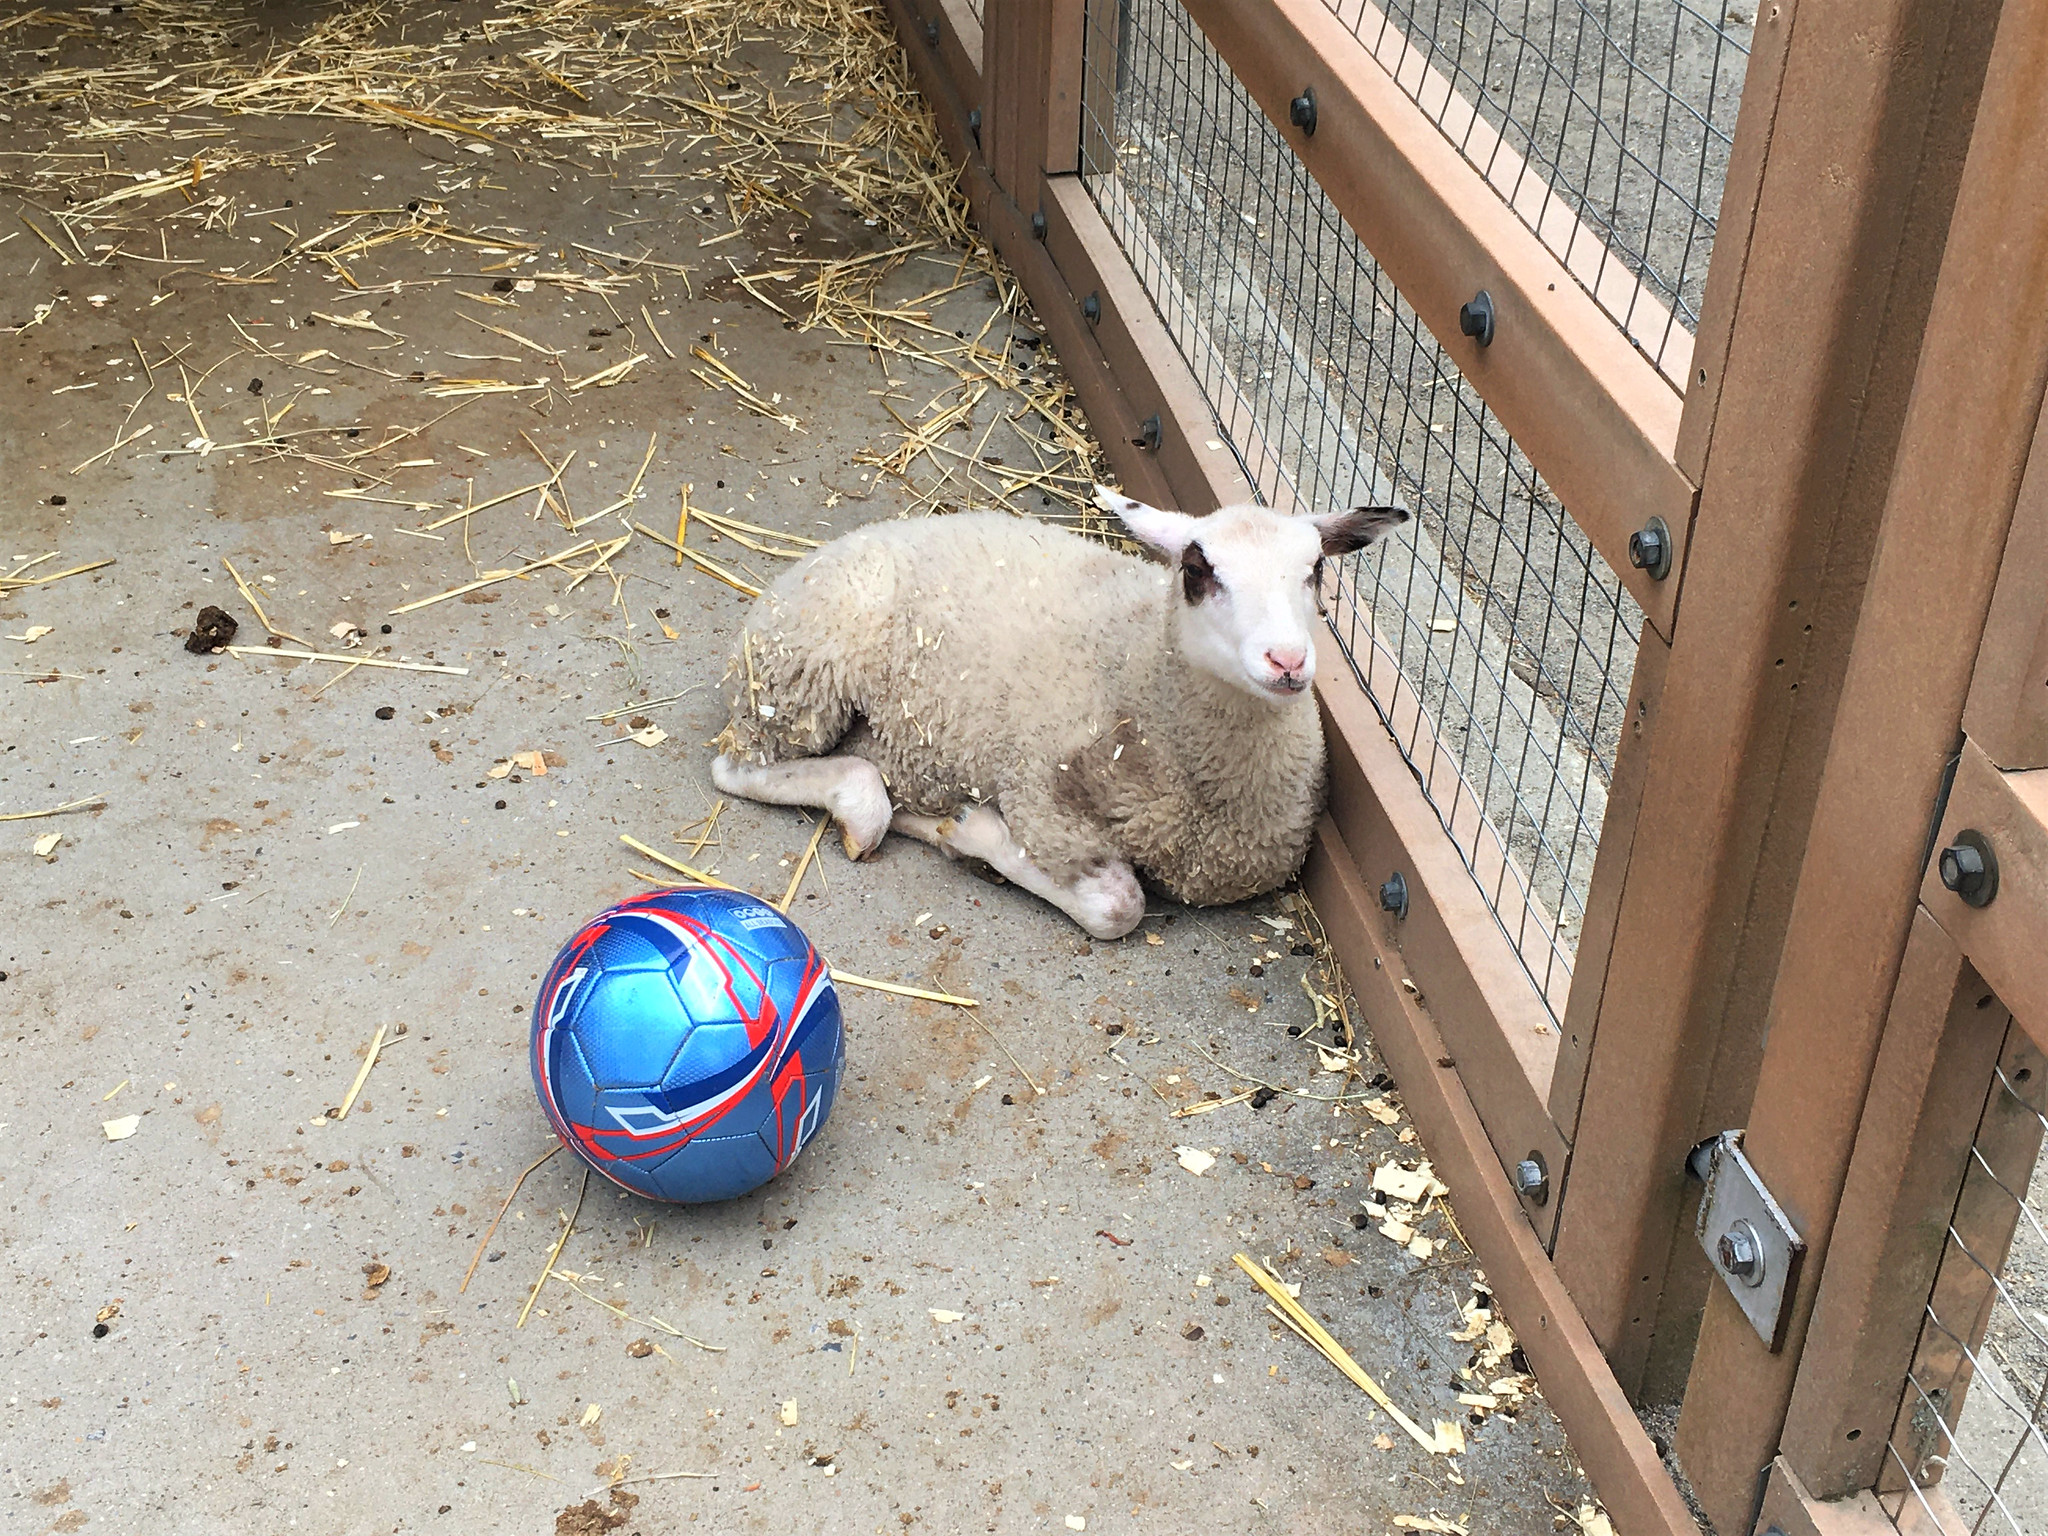 A photo of a lamb at the Prospect Park Zoo